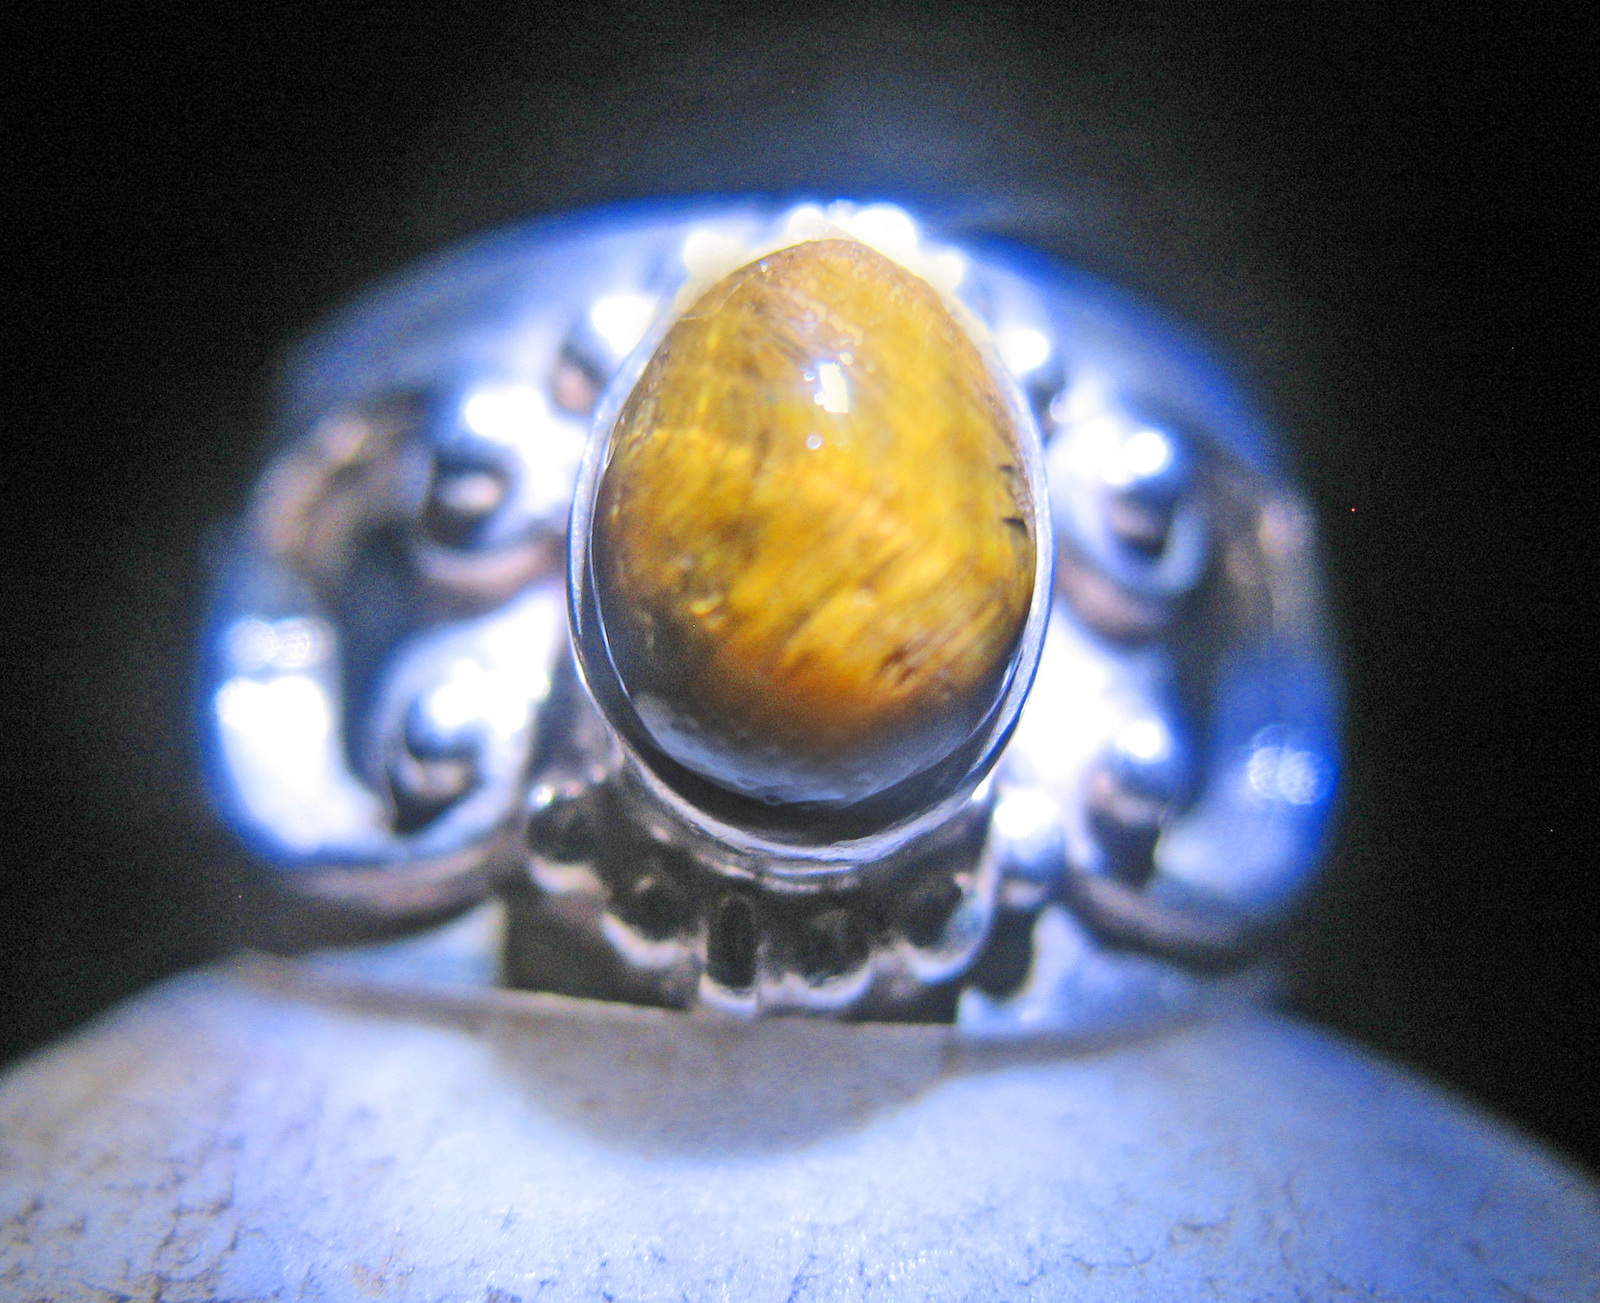 Haunted ring 7X LOVE AMOR PROTECT RELATIONS HIGH MAGICK 925 7 SCHOLARS Cassia4 - $200.00